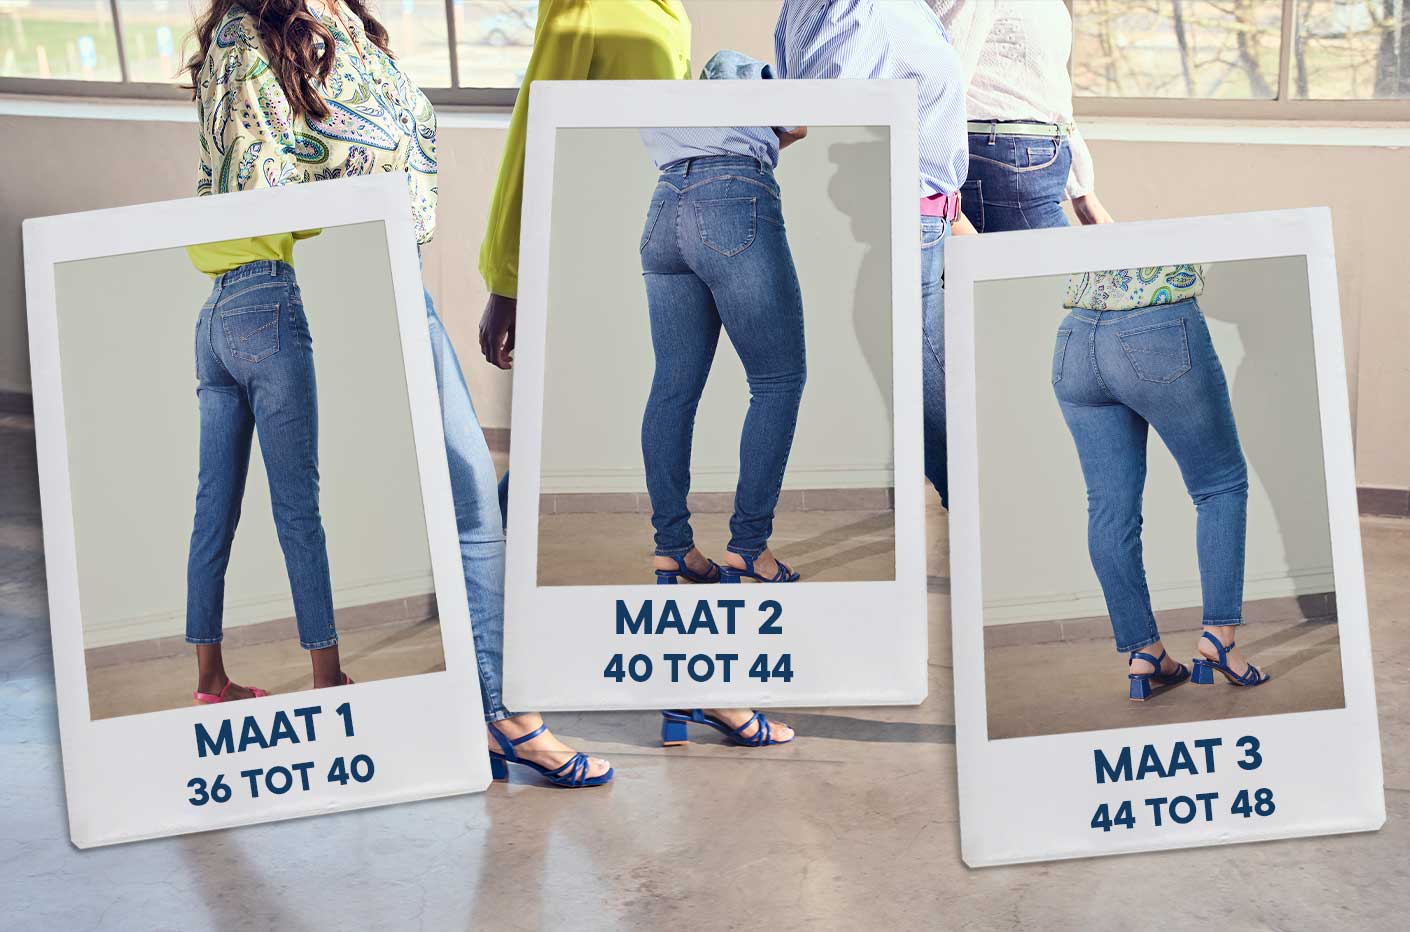 The first Belgian multiple size jeans